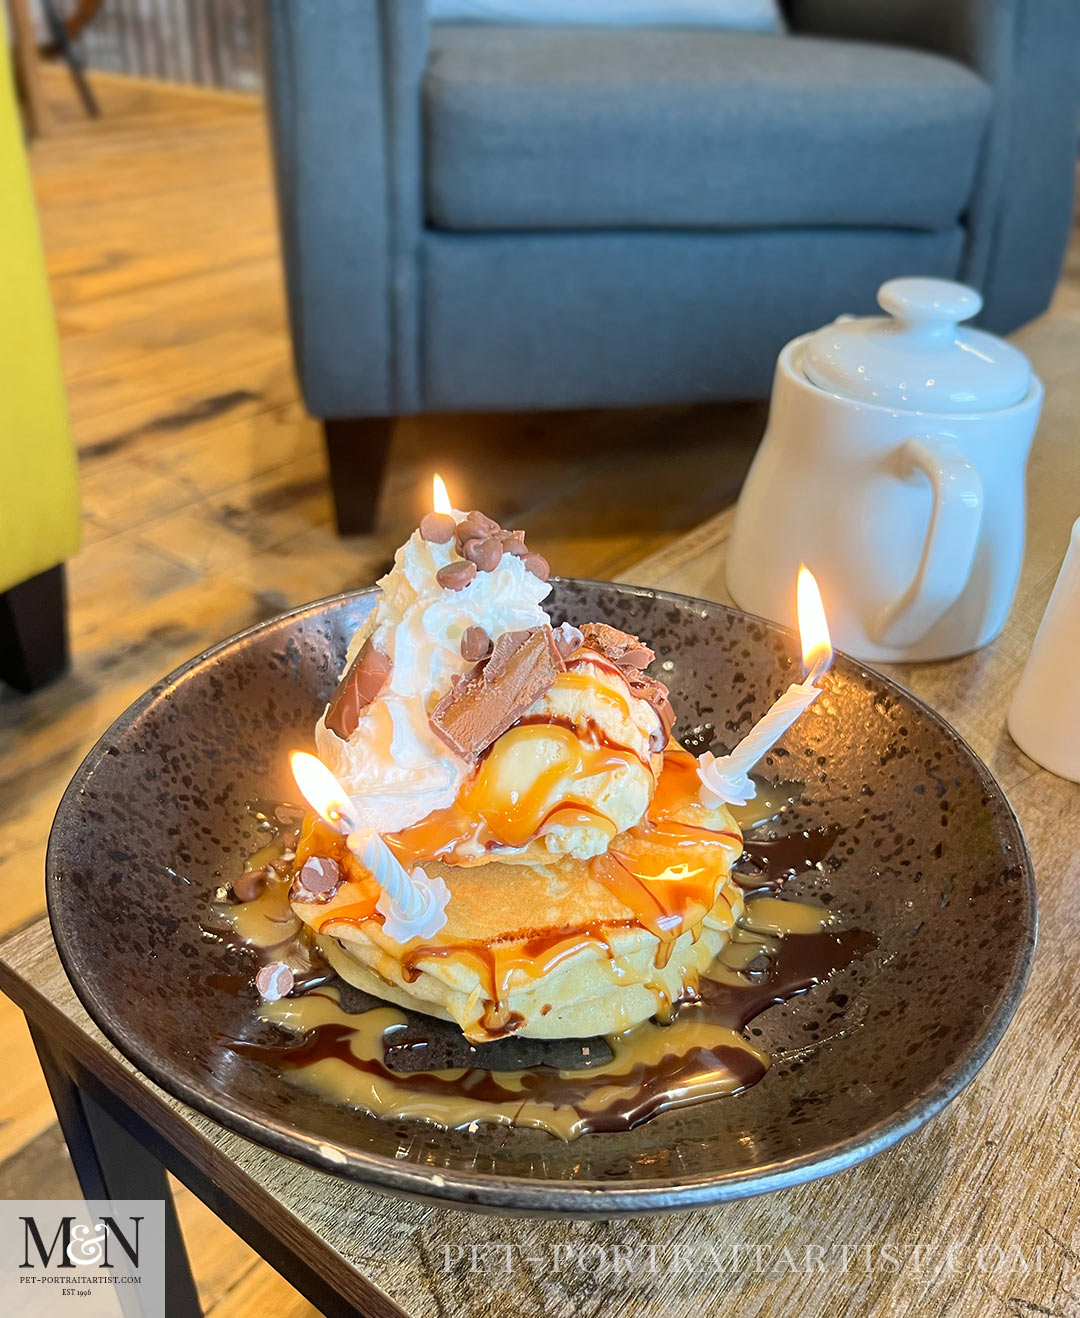 Birthday Pancakes called Mars attacks, Melanie's Monthly News in July